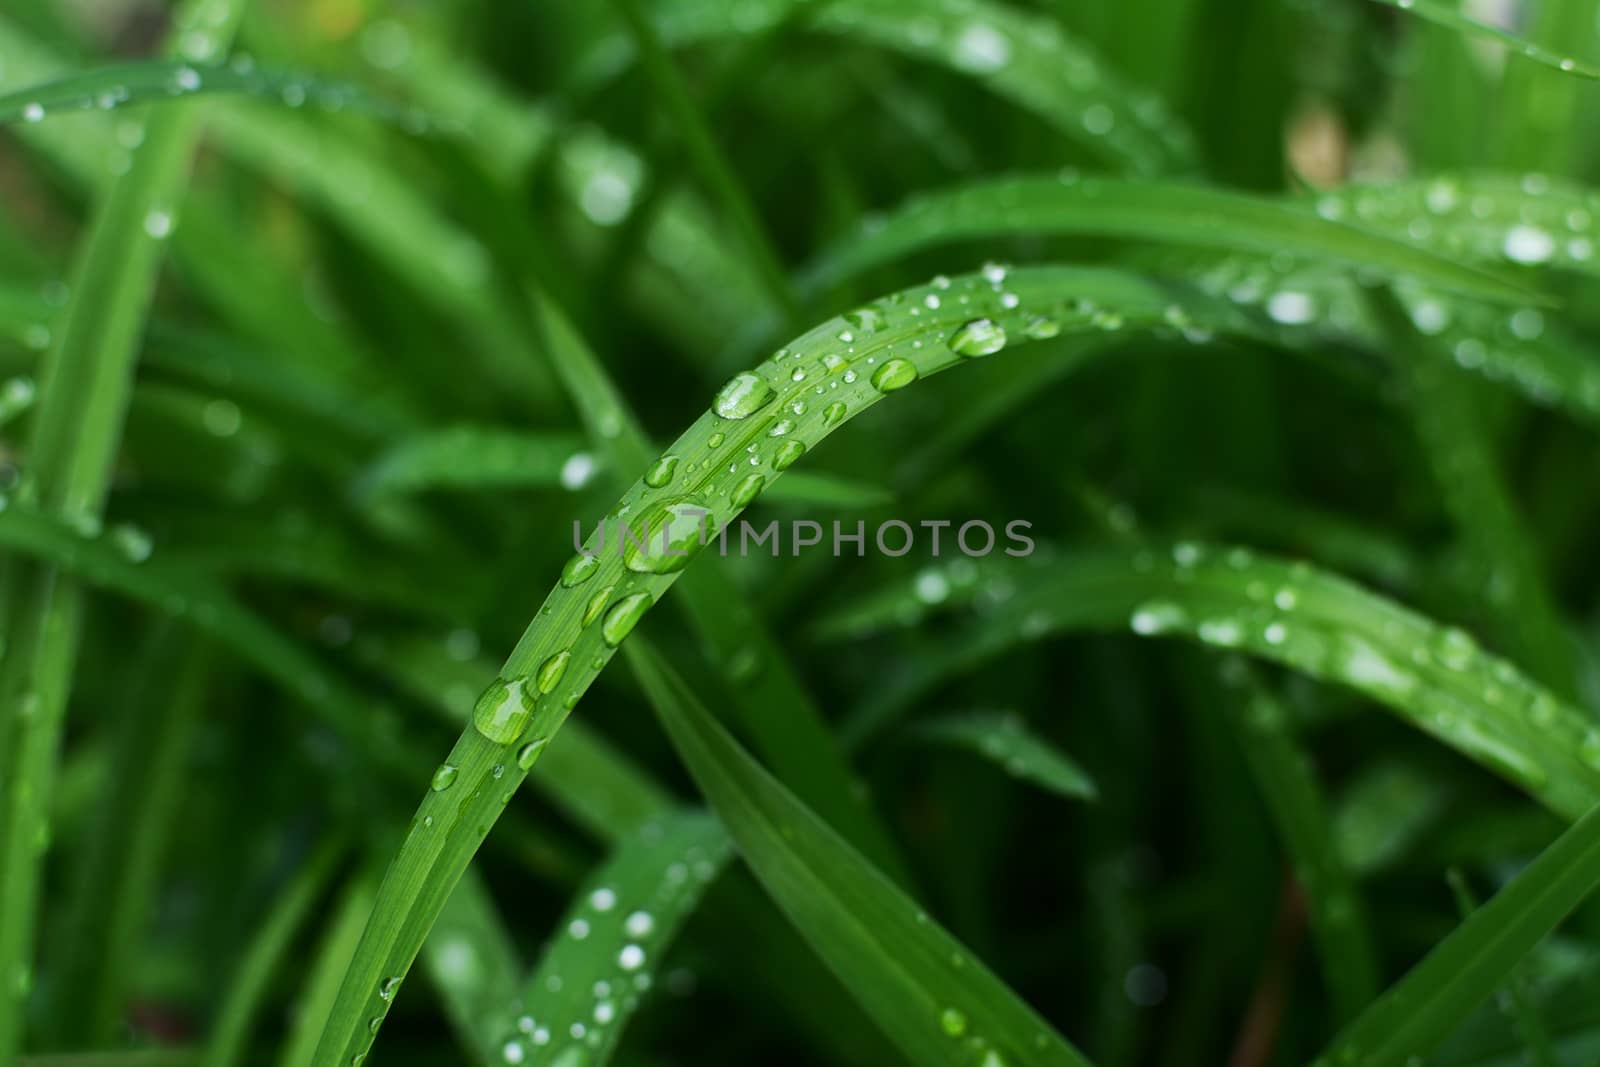 Large rain droplets on a long daylily leaf by sarahdoow